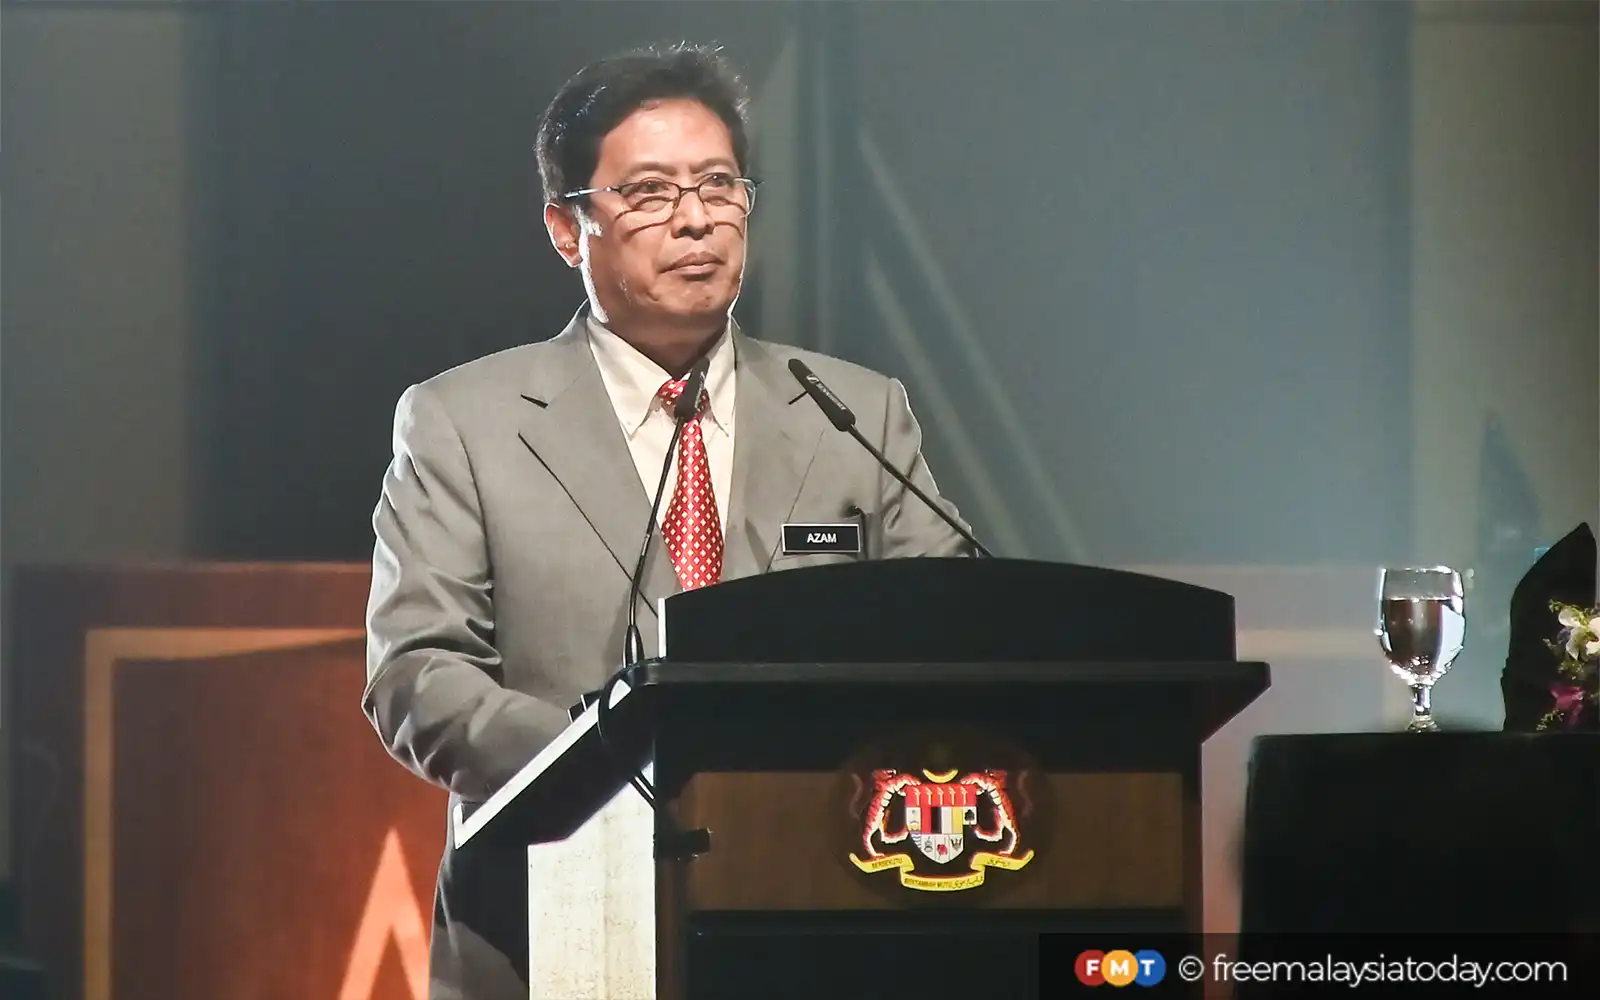 rm277bil lost to corruption in 5 years, says macc chief